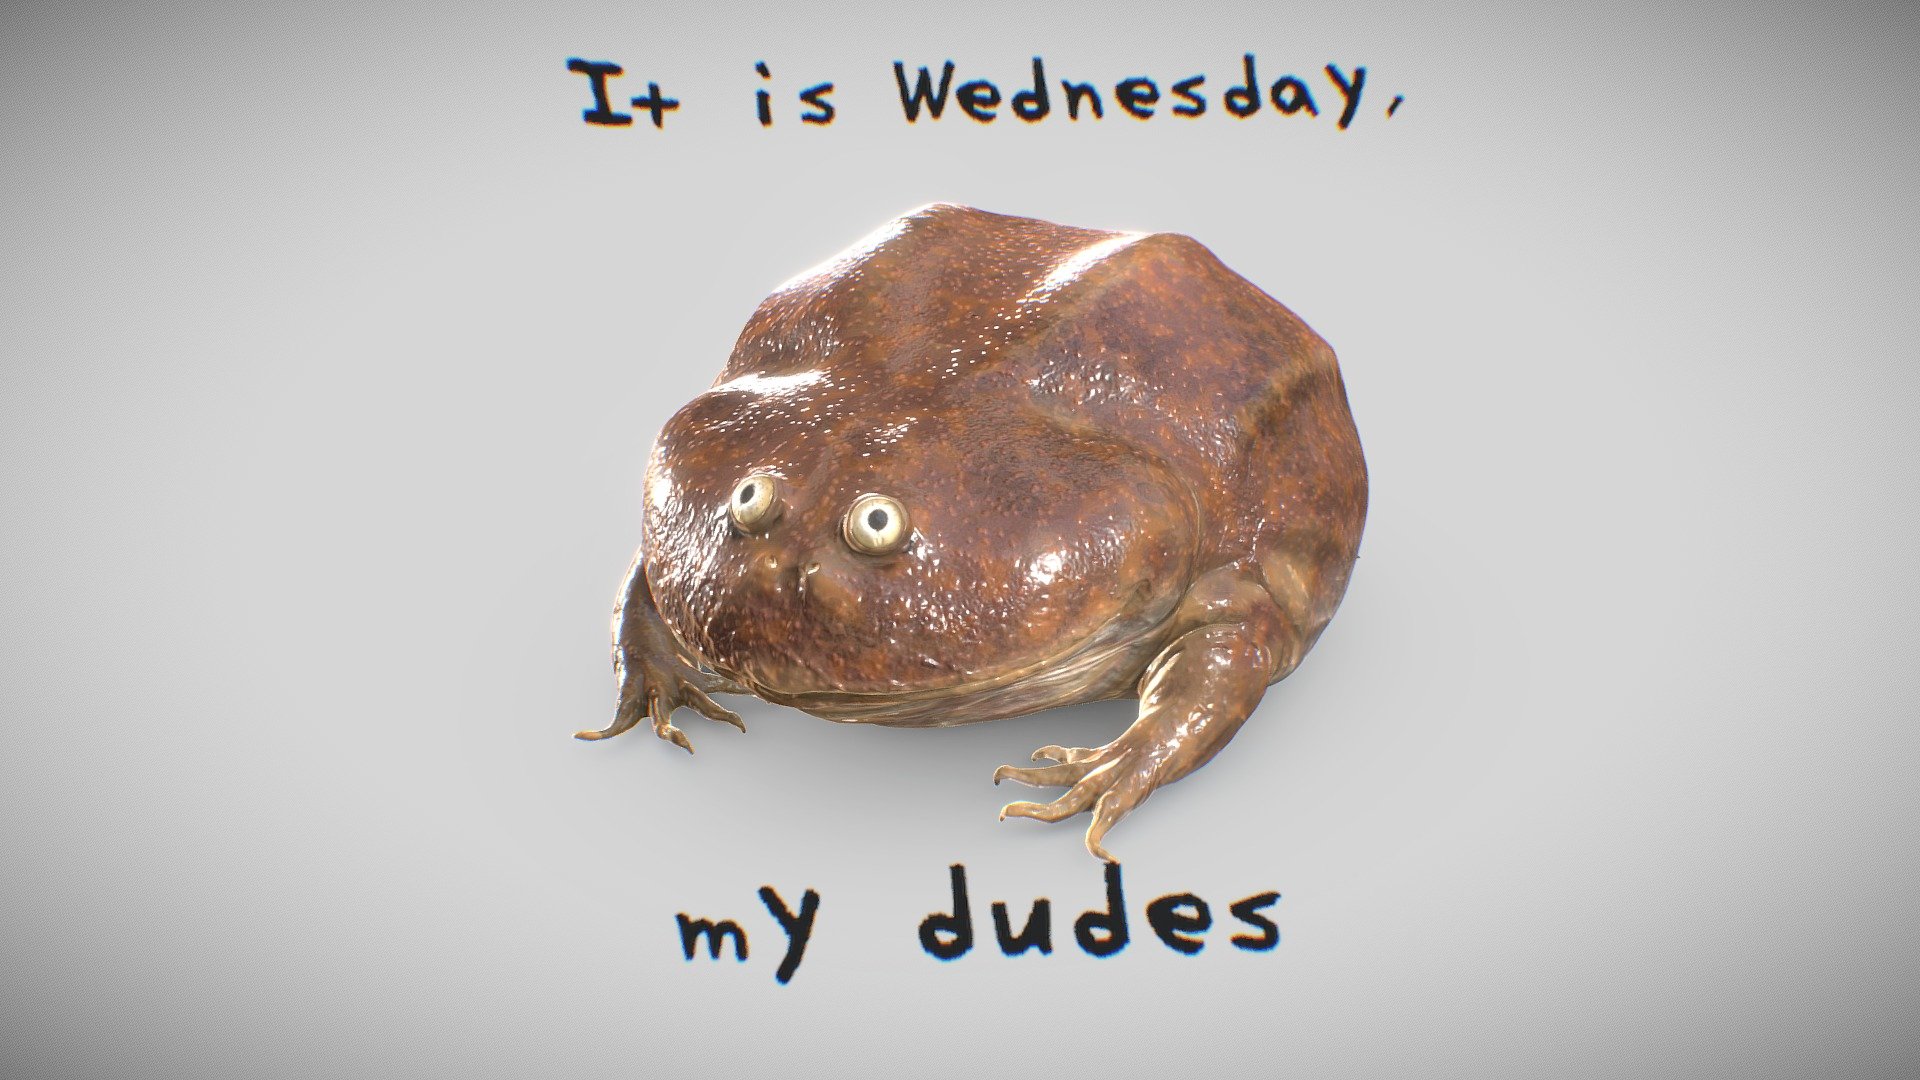 It is Wednesday, my dudes